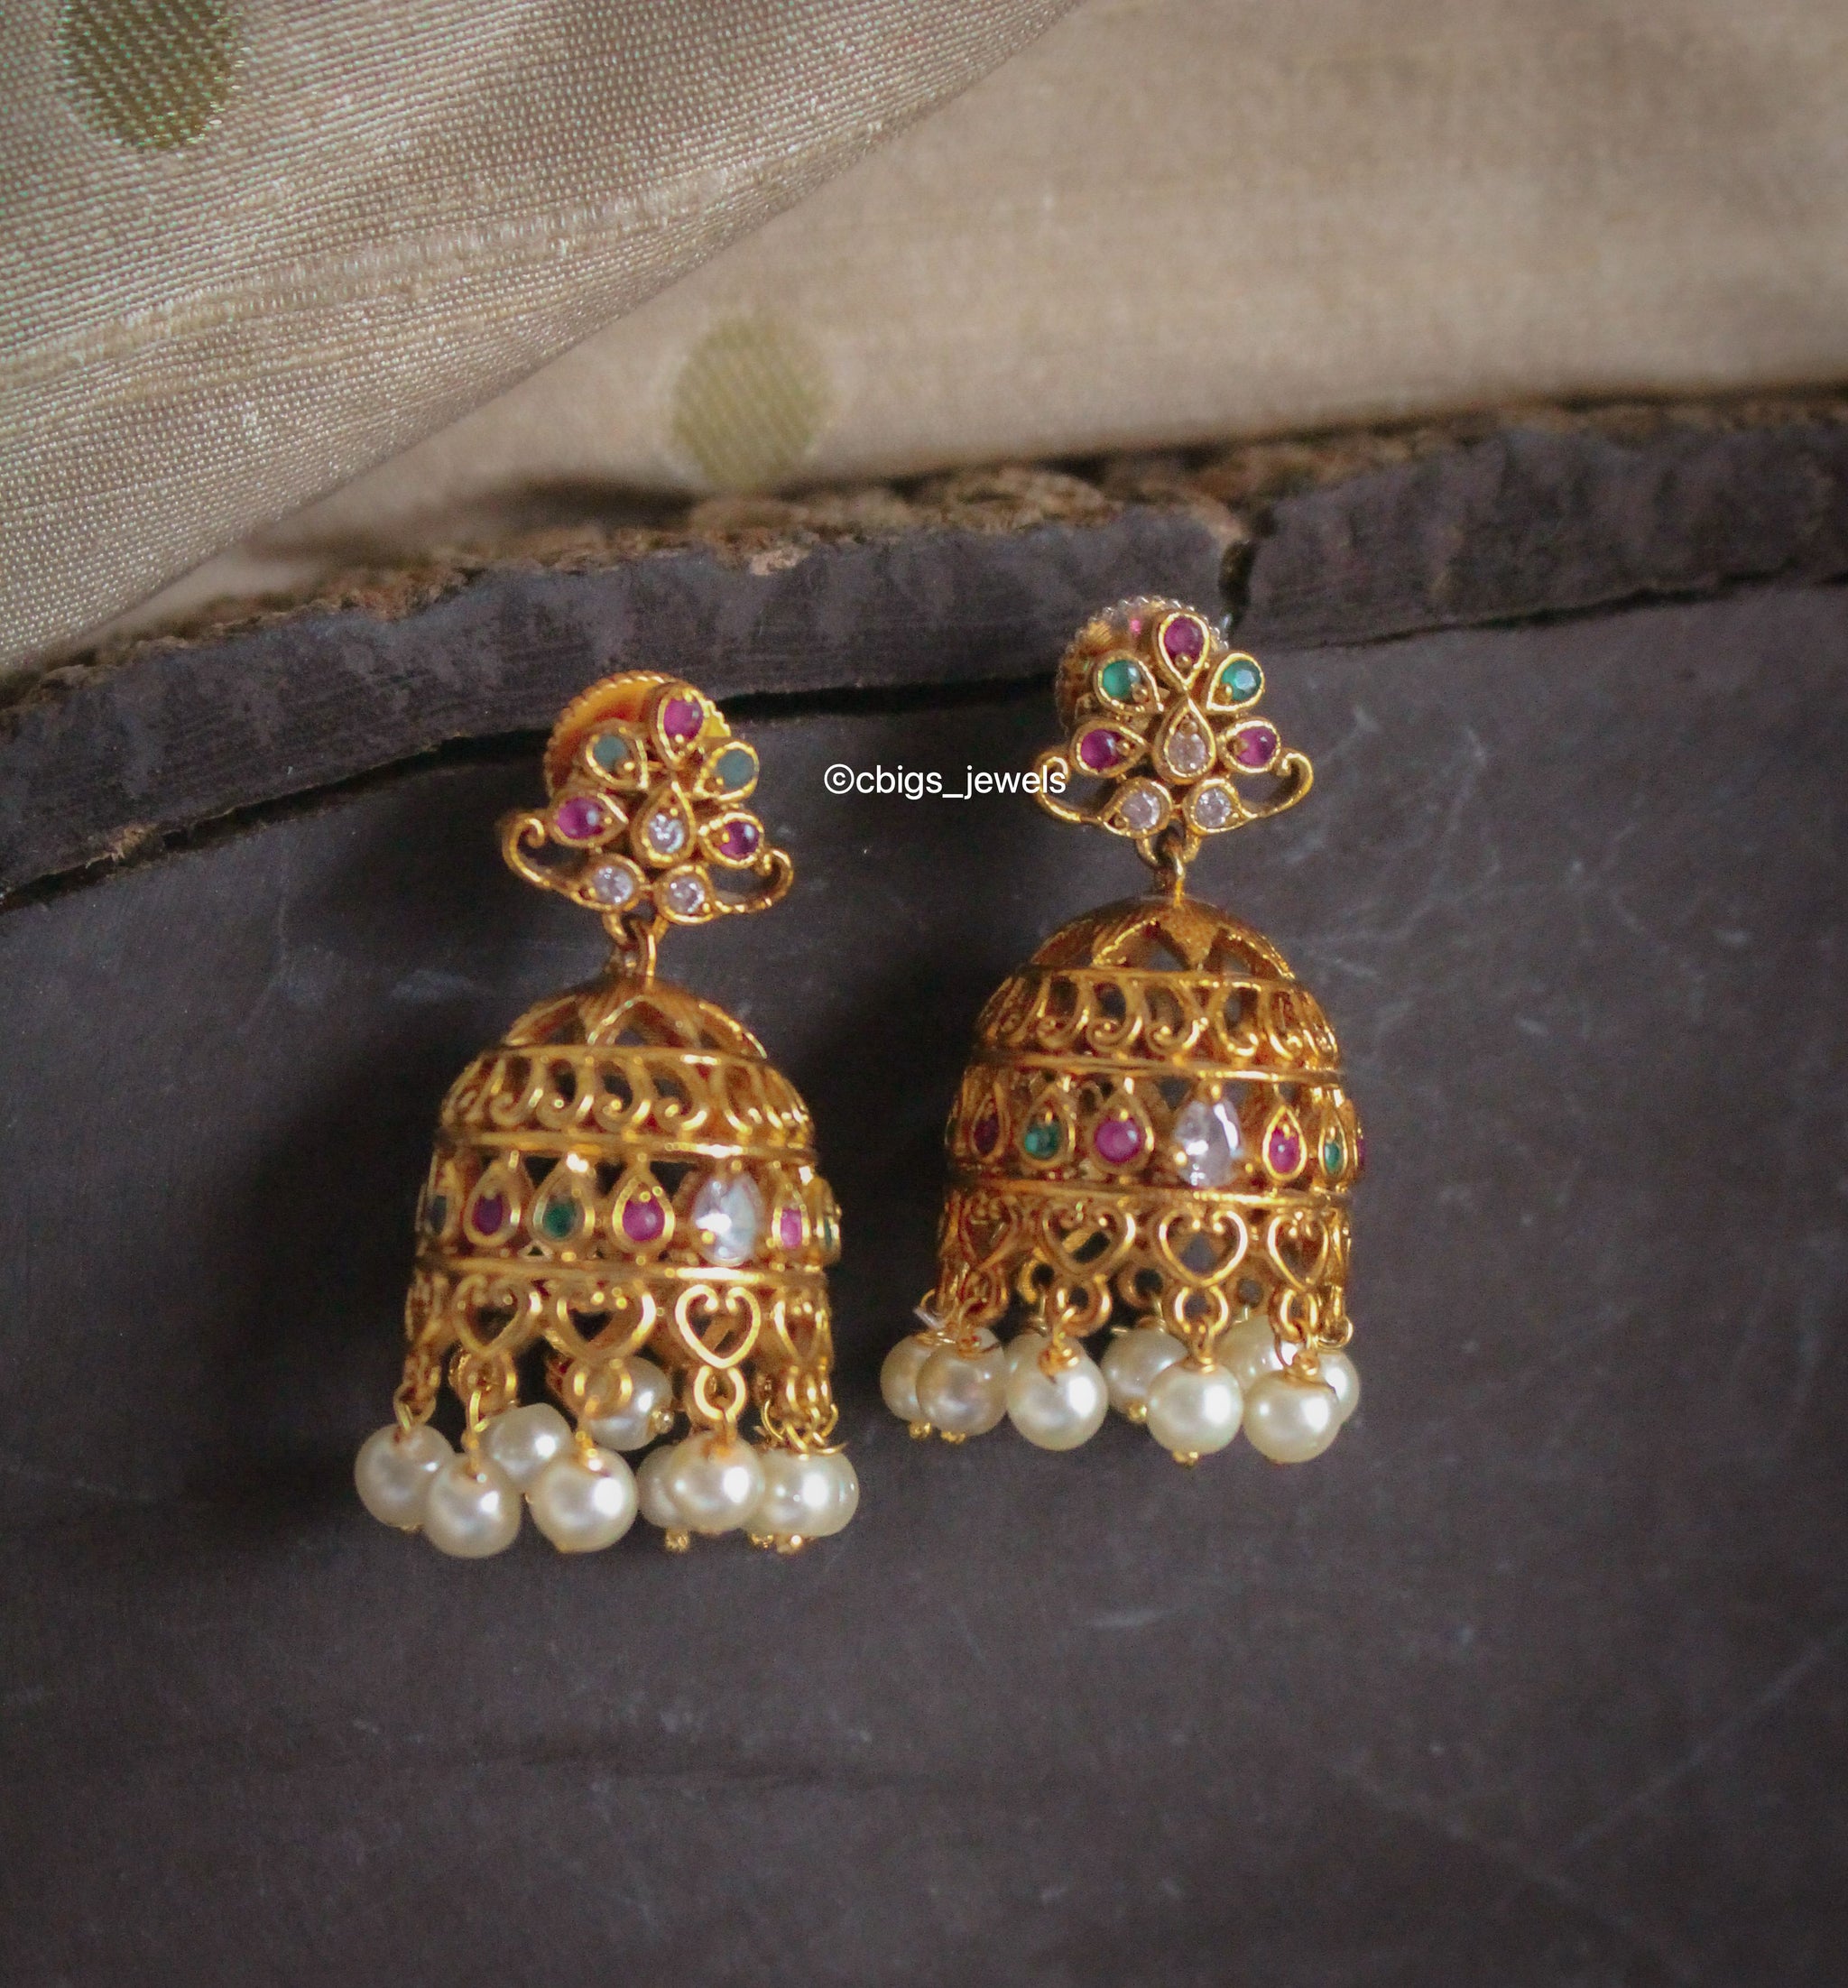 Pearl Earrings in Gold For Girls | Jewelry Gift Idea | Light-weight Go